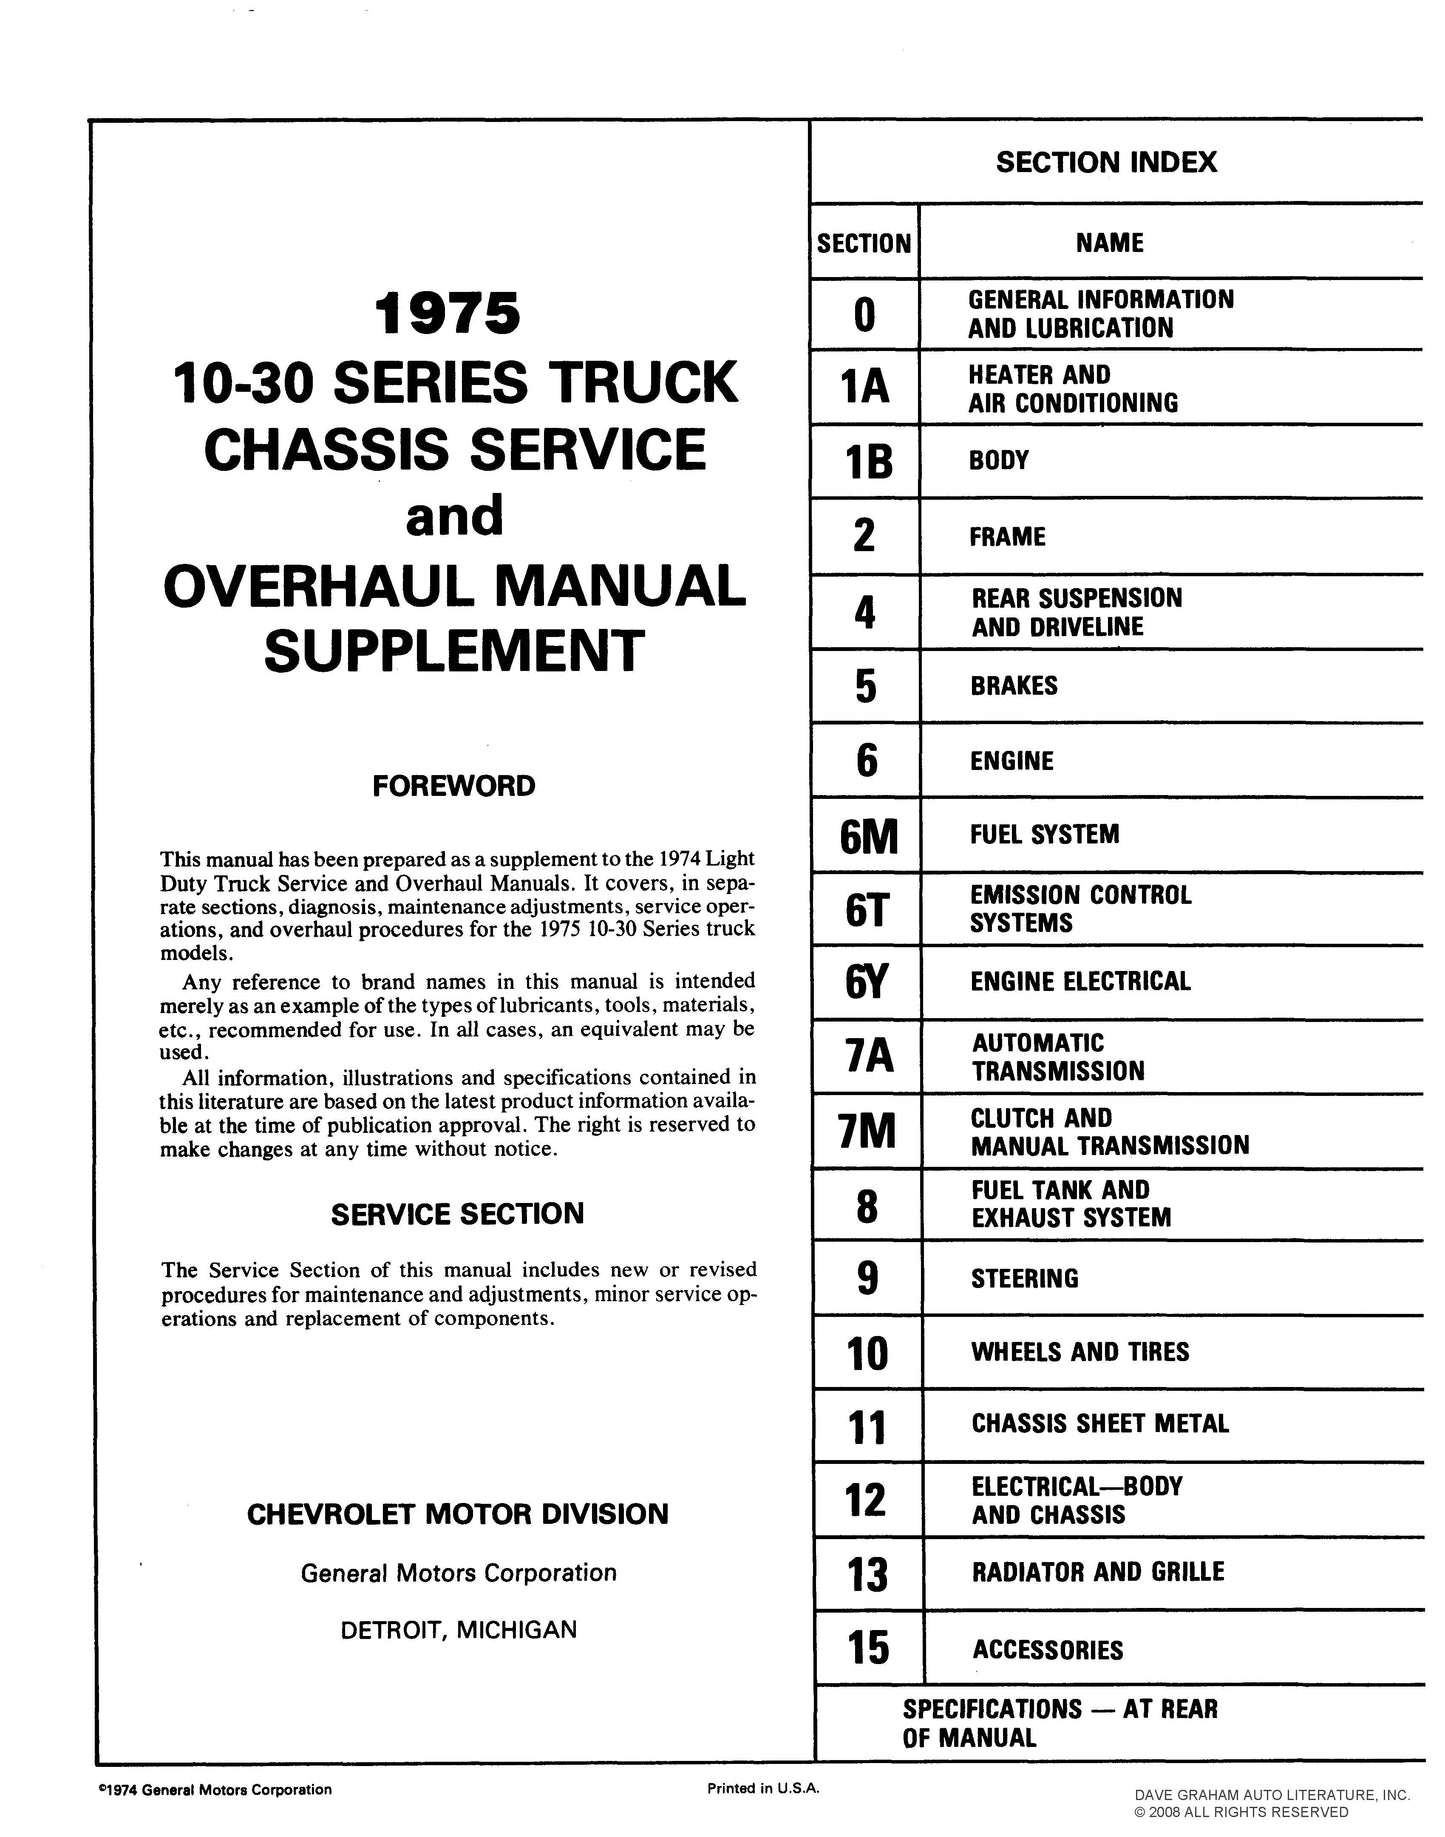 1974-1975 Chevy Shop, Overhaul, & Body Manuals - All Models